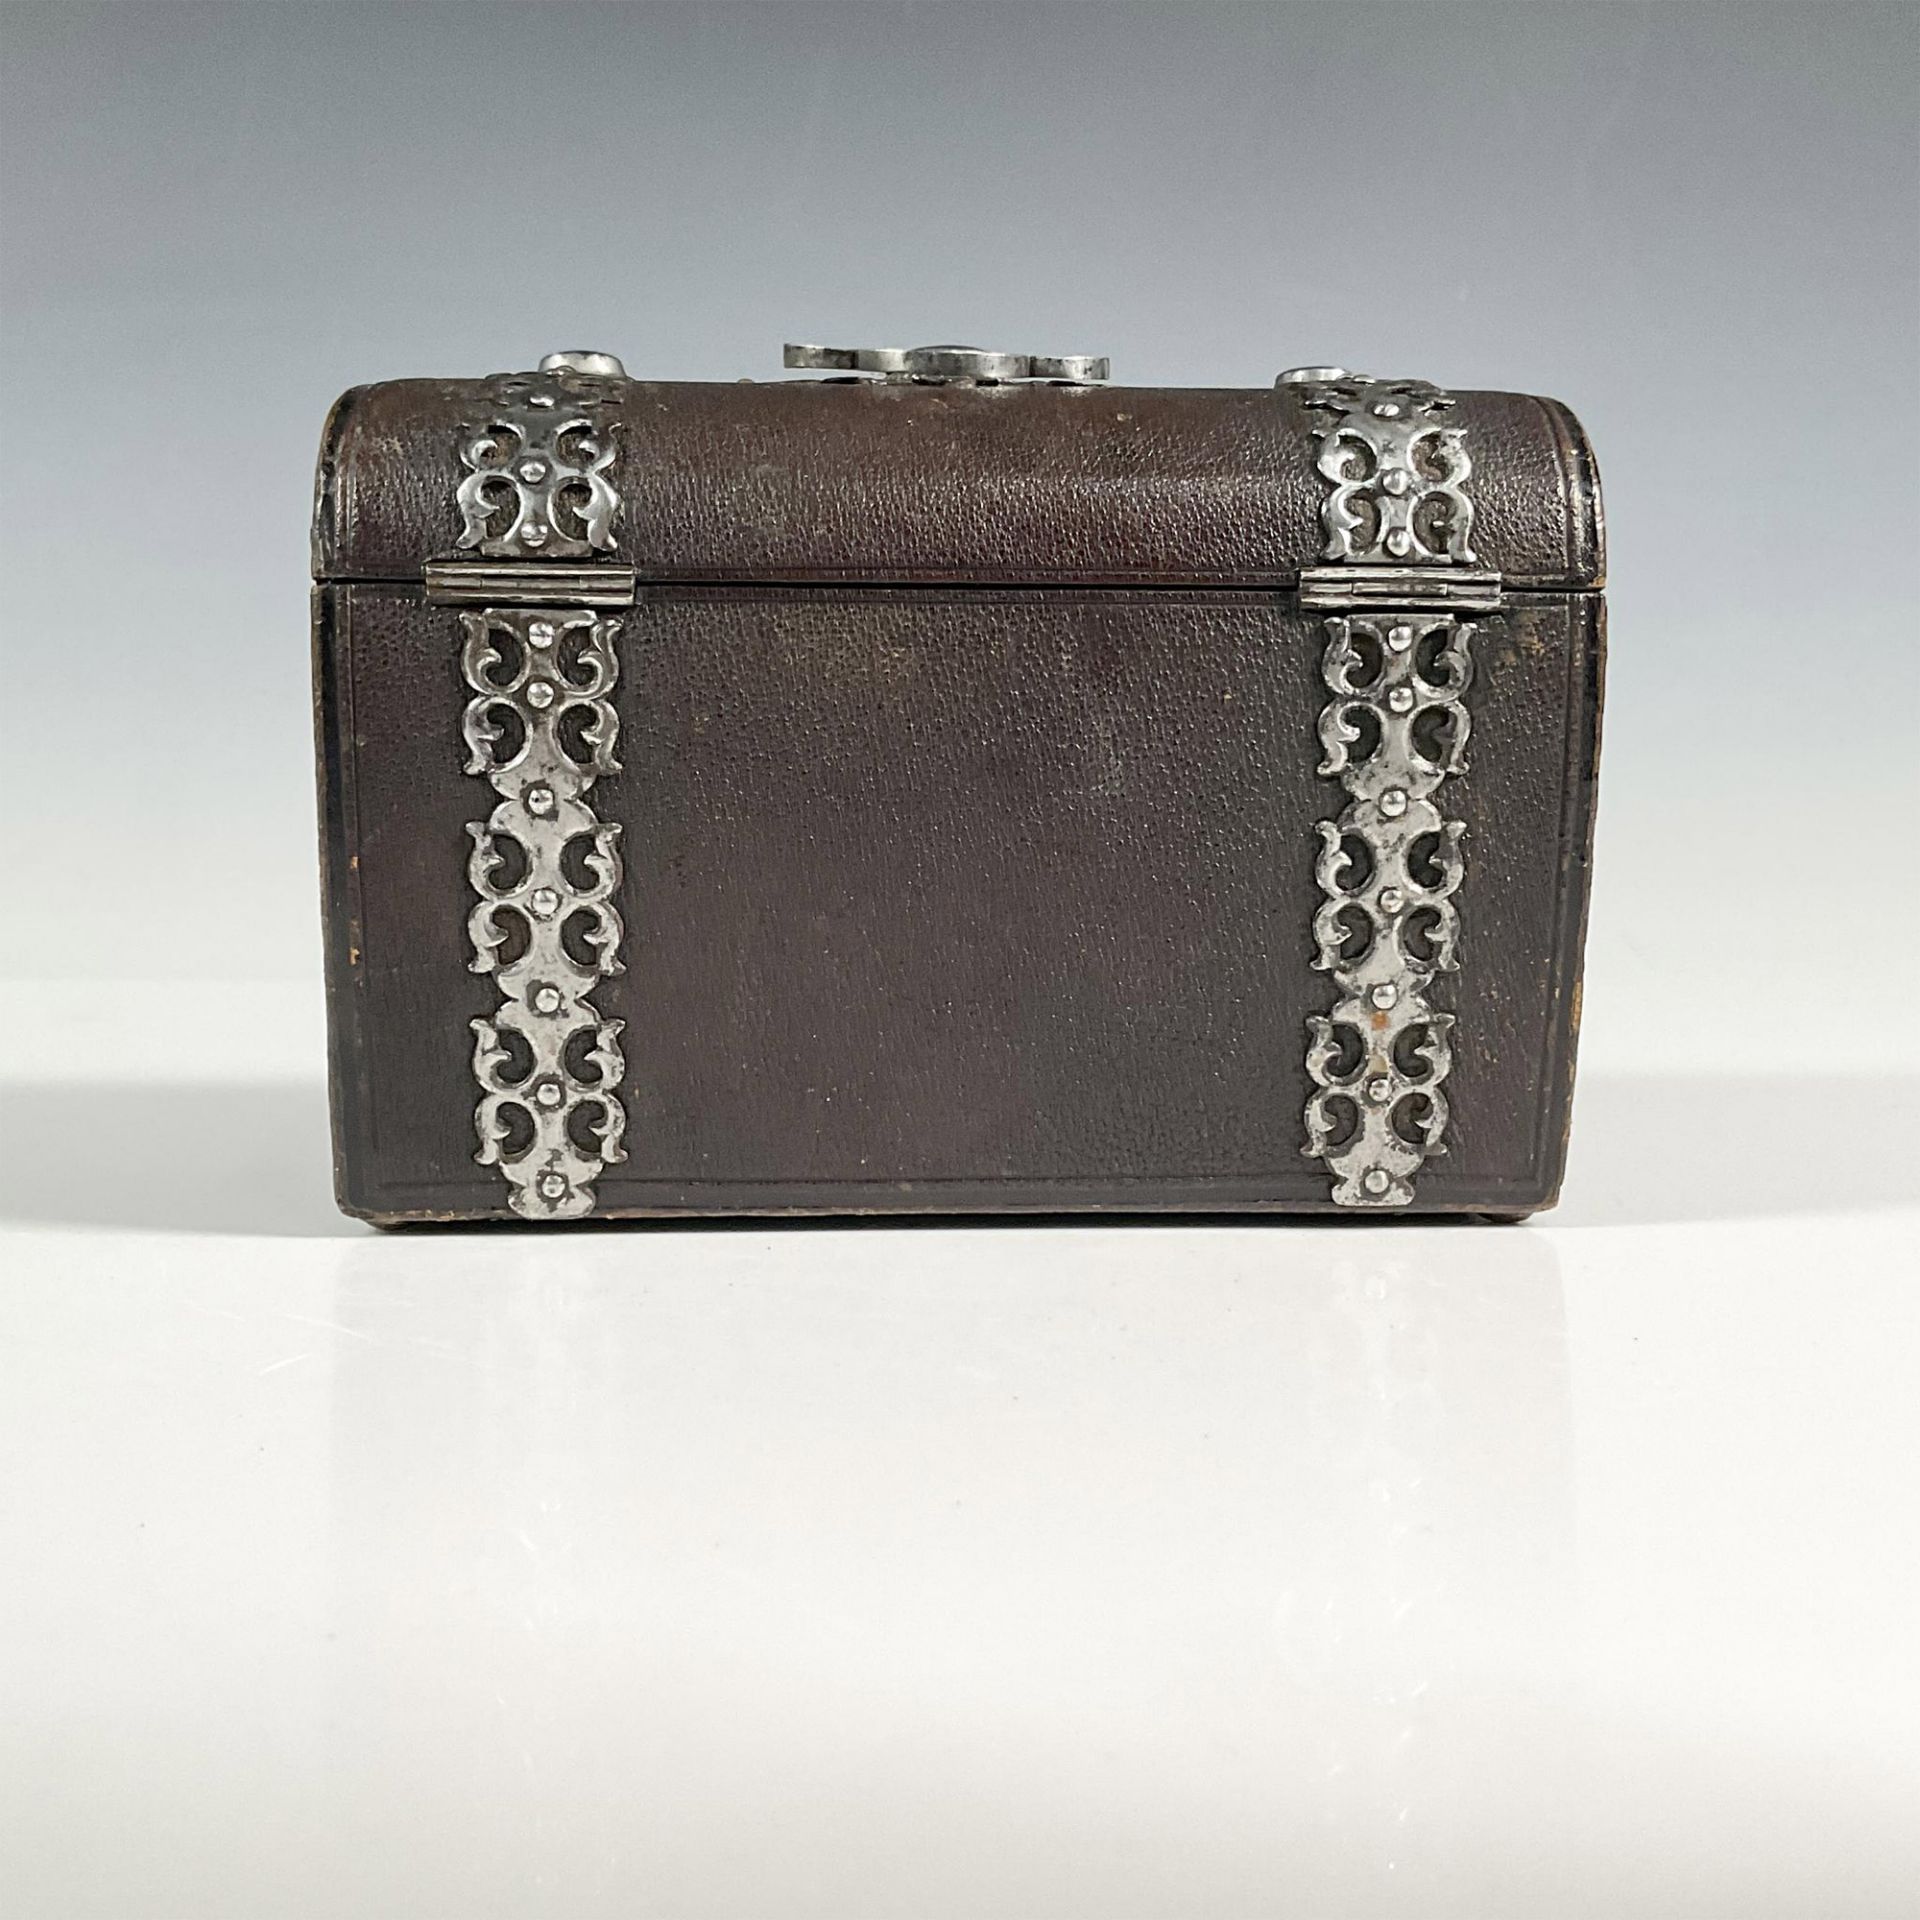 European Steel and Leather Casket Box - Image 3 of 4